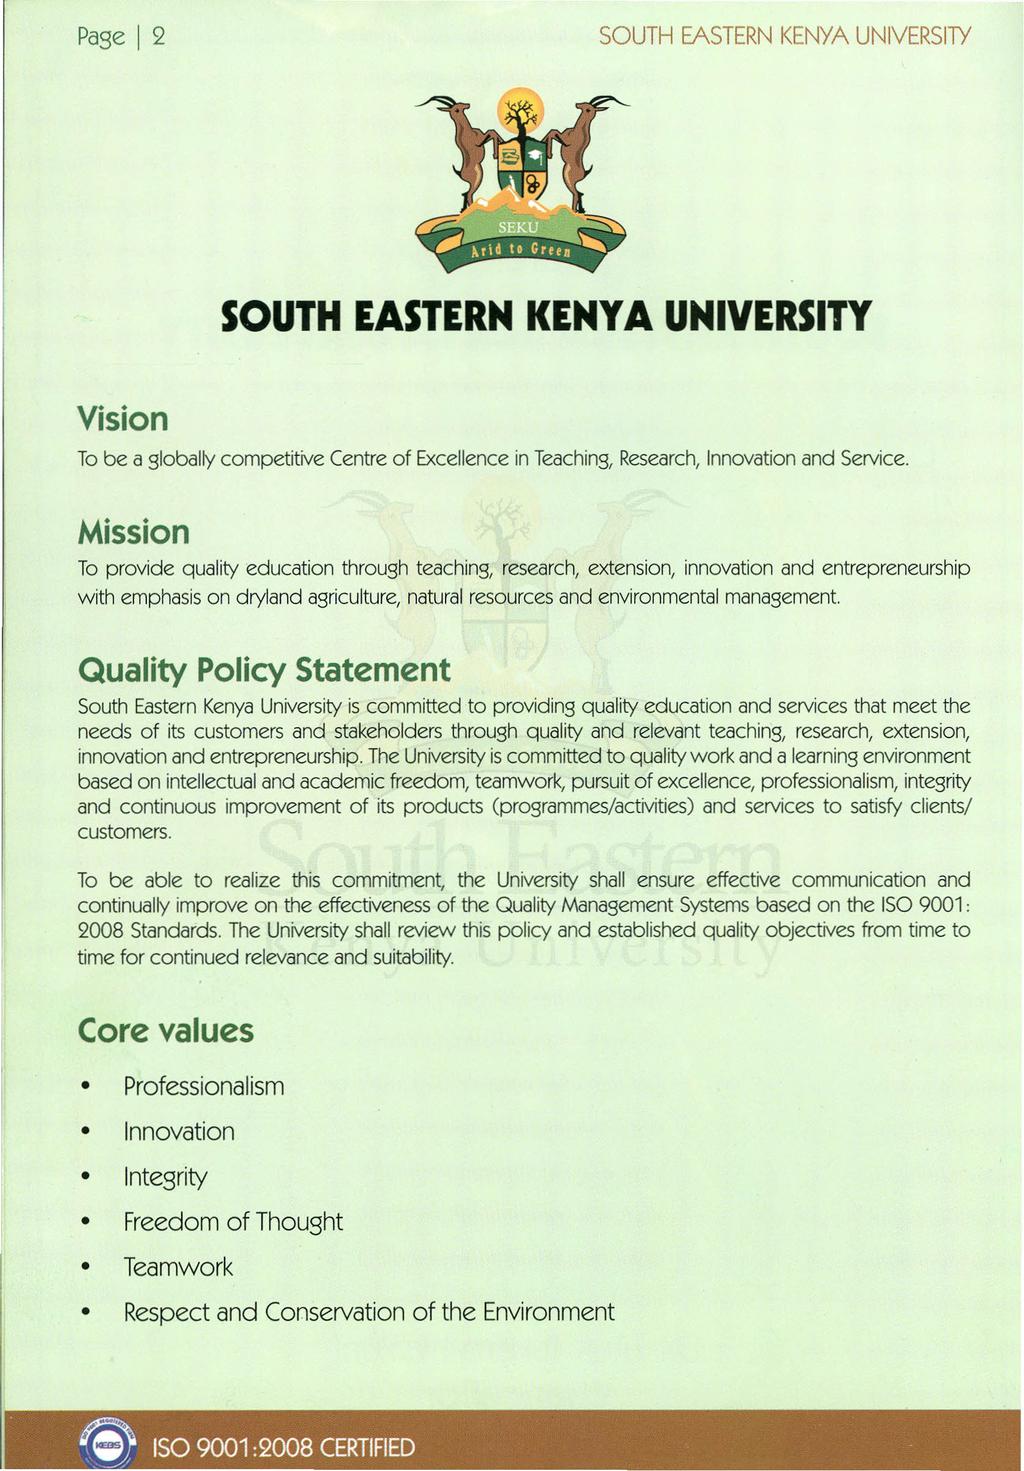 o ISO 9001 :2008 CERTIFIED - -' Page I 2 SOUTH EASTERN KENYA UNIVERSITY SOUTH EASTERN KENYA UNIVERSITY Vision To be a globally competitive Centre of Excellence in Teaching, Research, Innovation and